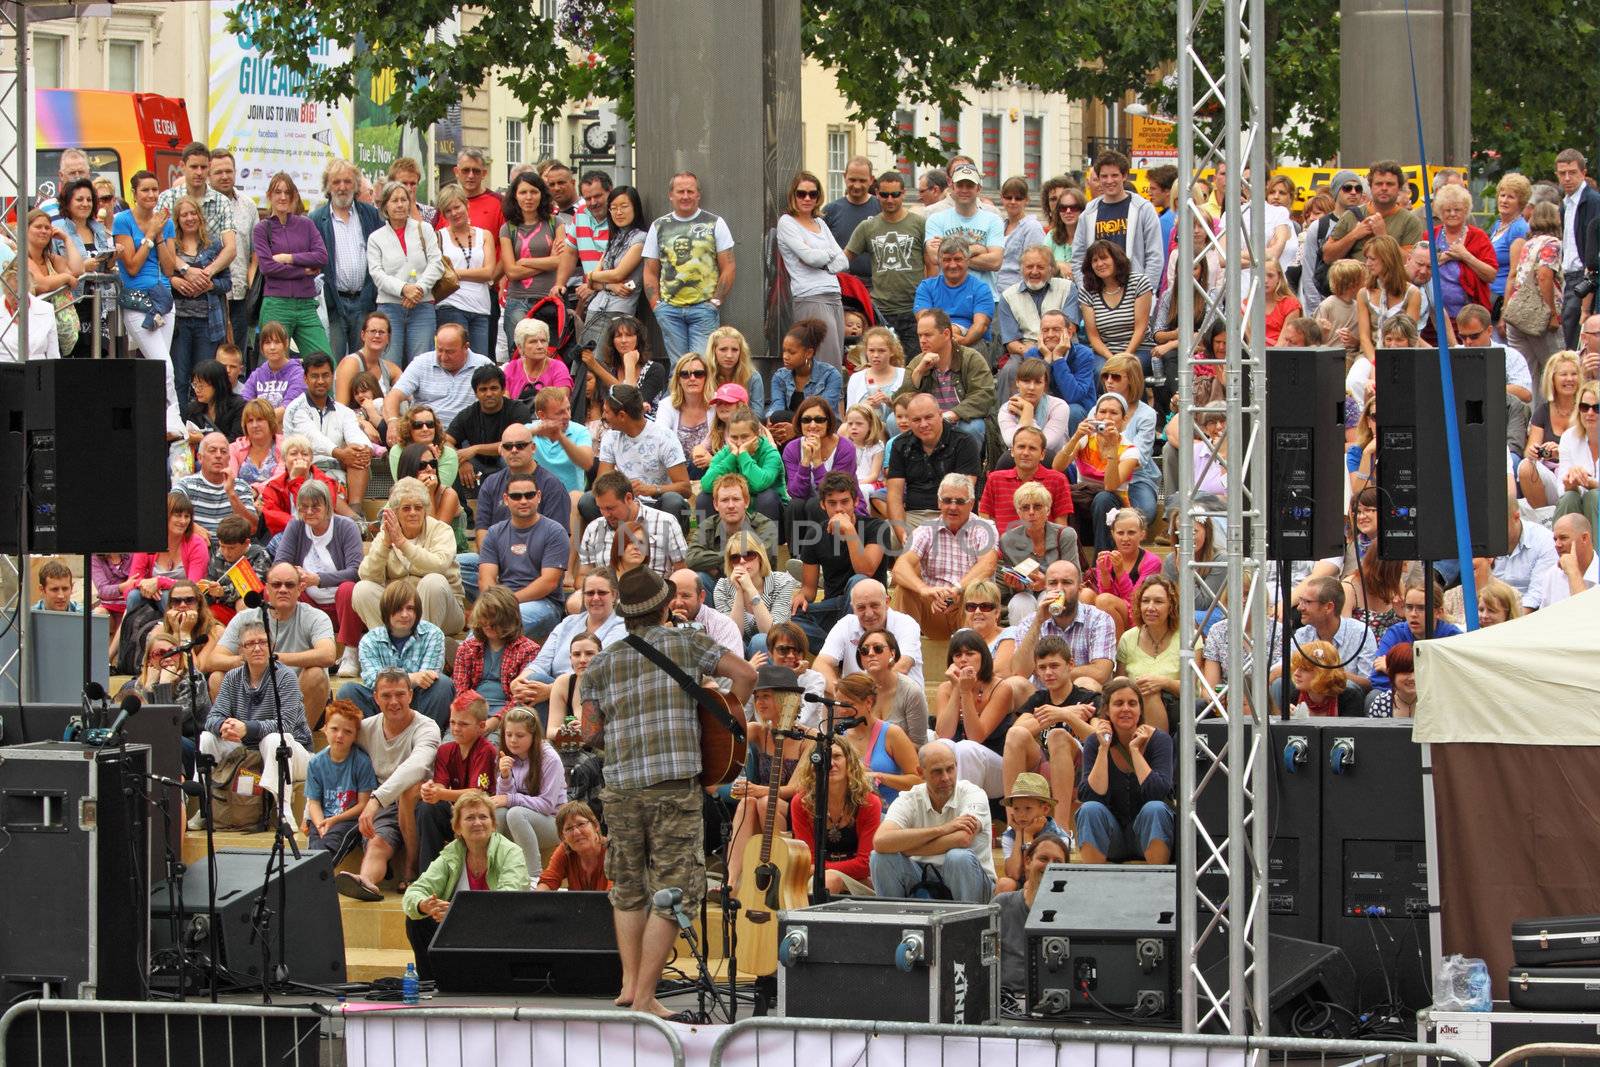 BRISTOL, ENGLAND - JULY 31: Performer out front on the Cascade Steps stage at the Harbour Festival in Bristol, England on July 31, 2010. Founded in 1971, this three day free festival played host to more than 250,000 spectators